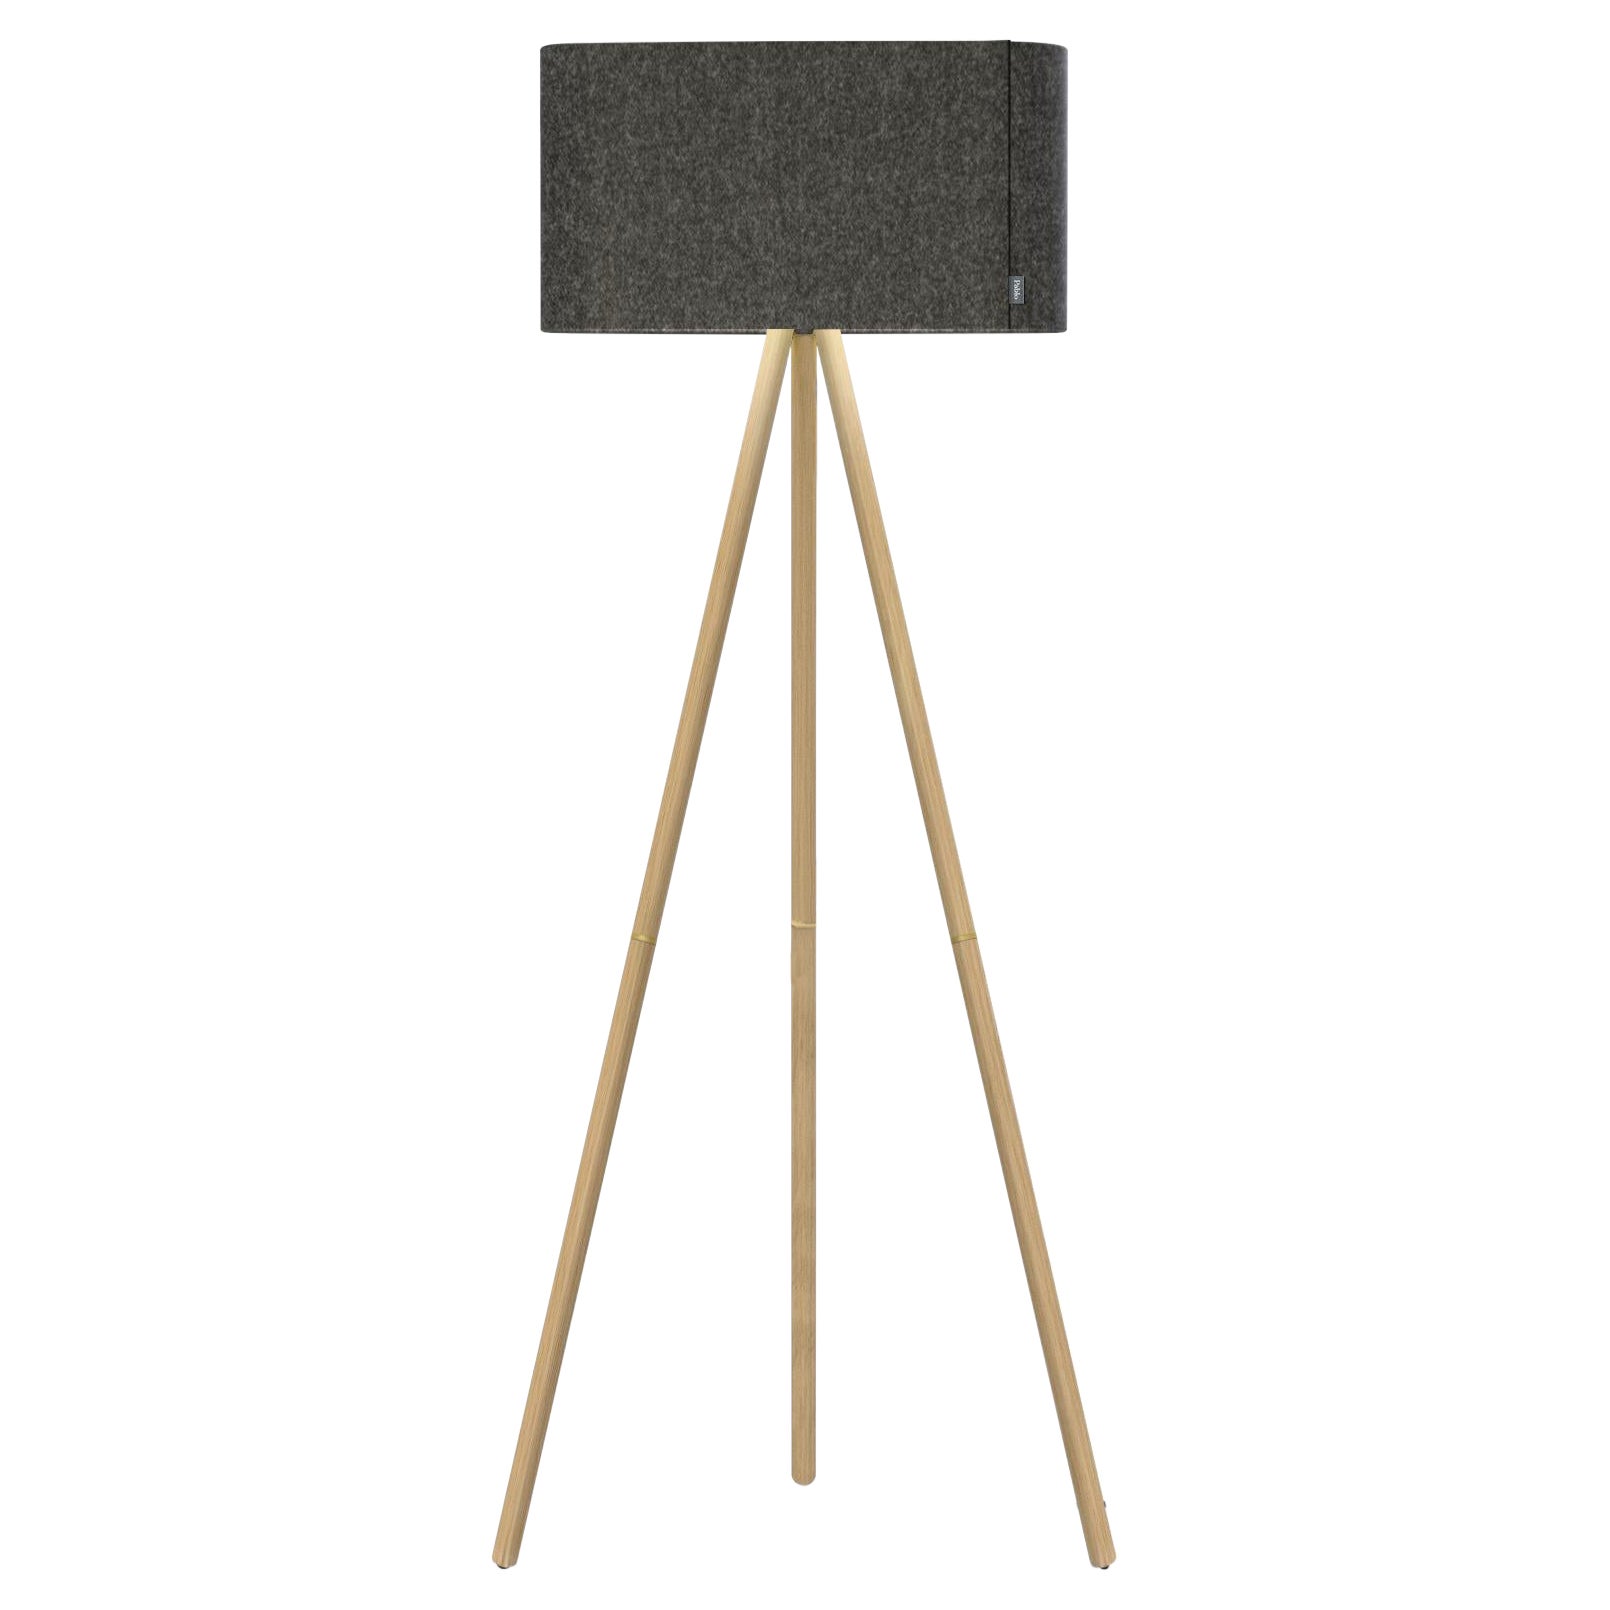 Belmont Floor Lamp in Charcoal with Oak Legs by Pablo Designs For Sale